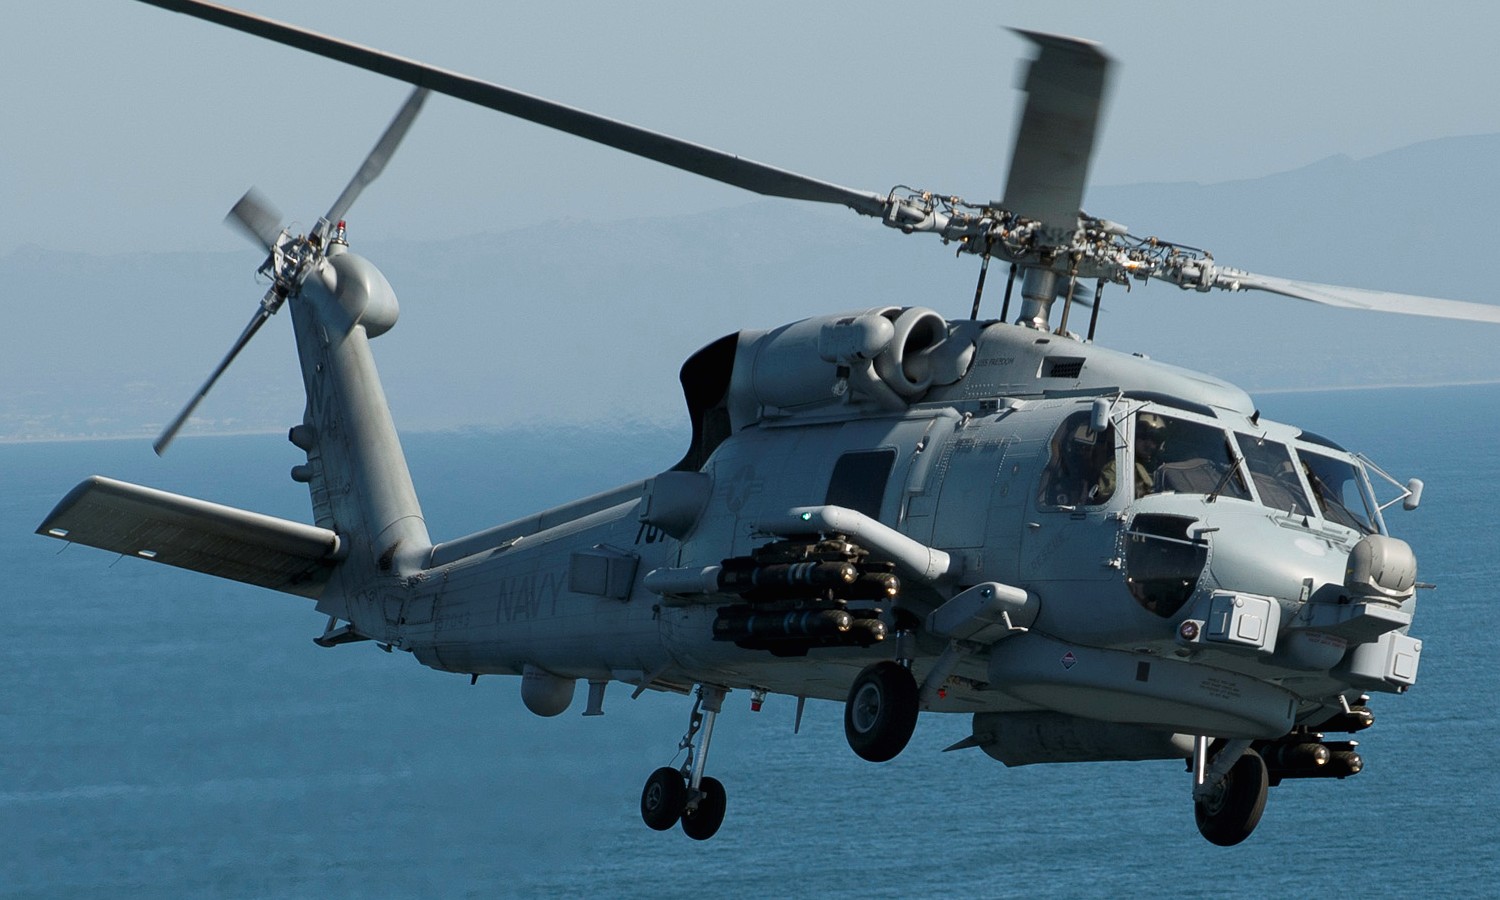 hsm-73 battlecats helicopter maritime strike squadron us navy mh-60r seahawk 2013 36